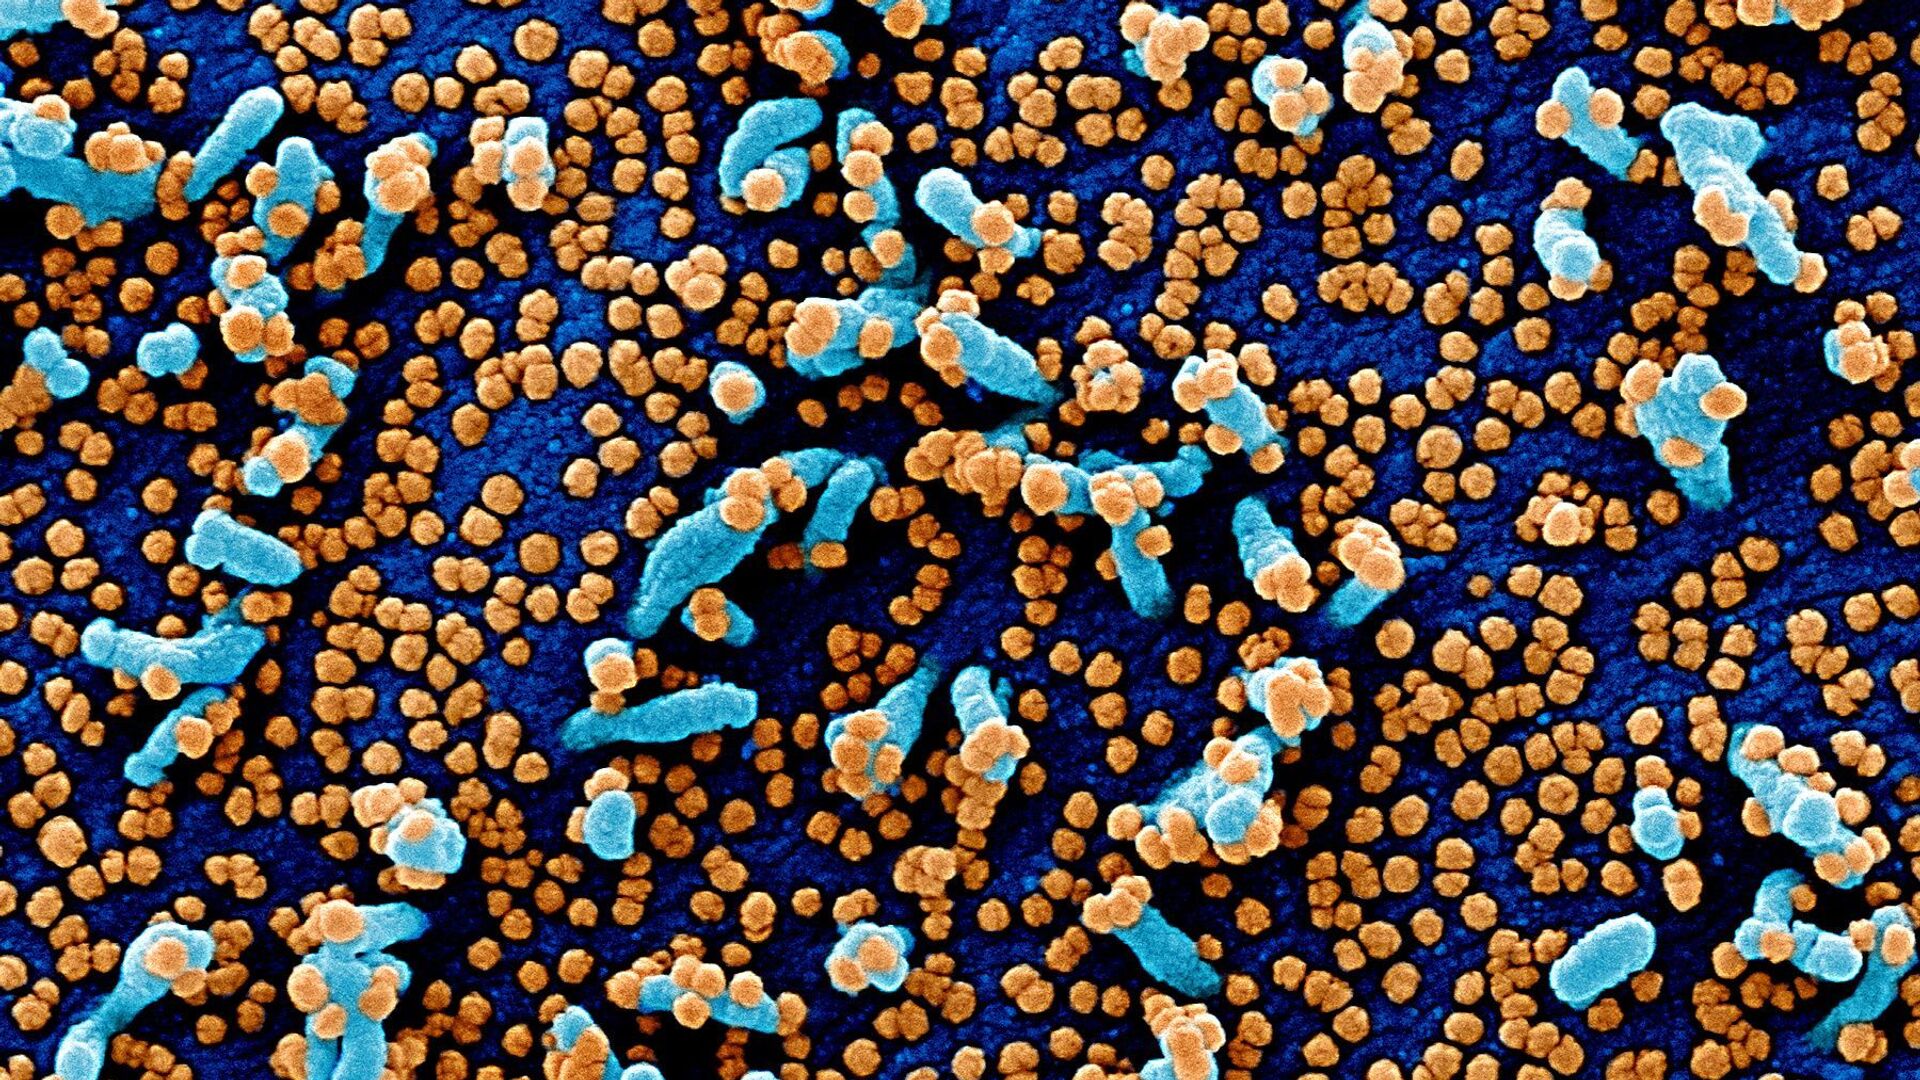 Colorized scanning electron micrograph of a VERO E6 cell (blue) heavily infected with SARS-COV-2 virus particles (orange), also known as novel coronavirus, isolated from a patient sample. Image captured and color-enhanced at the NIAID Integrated Research Facility (IRF) in Fort Detrick, Maryland - Sputnik Azərbaycan, 1920, 26.12.2021